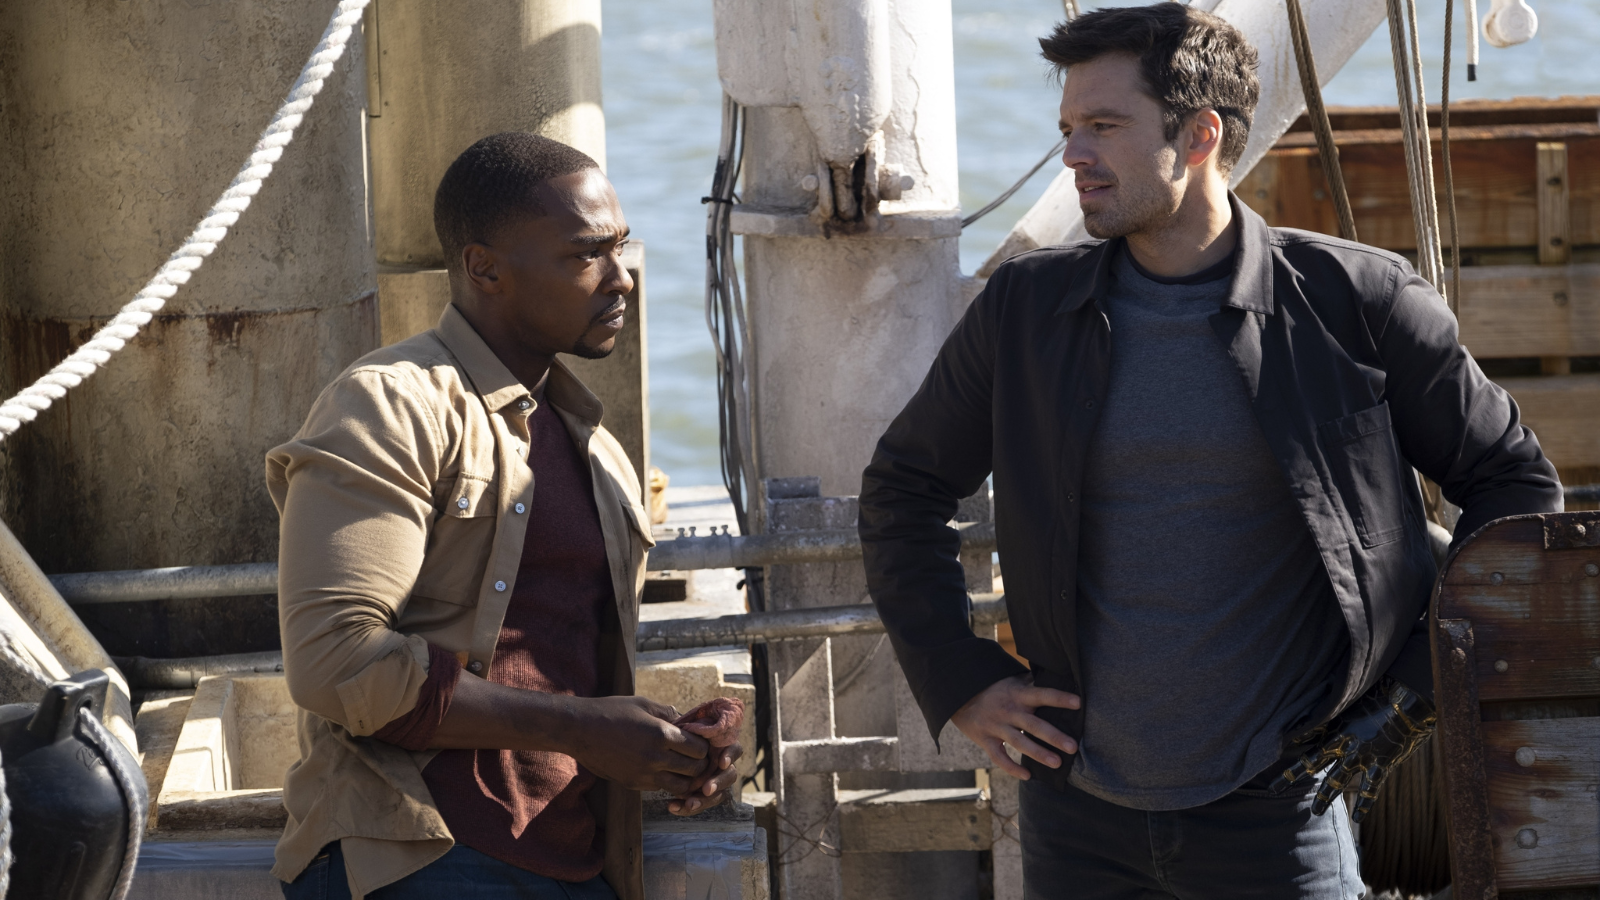 Sam and Bucky wearing shirts and light jackets while standing on a dock.